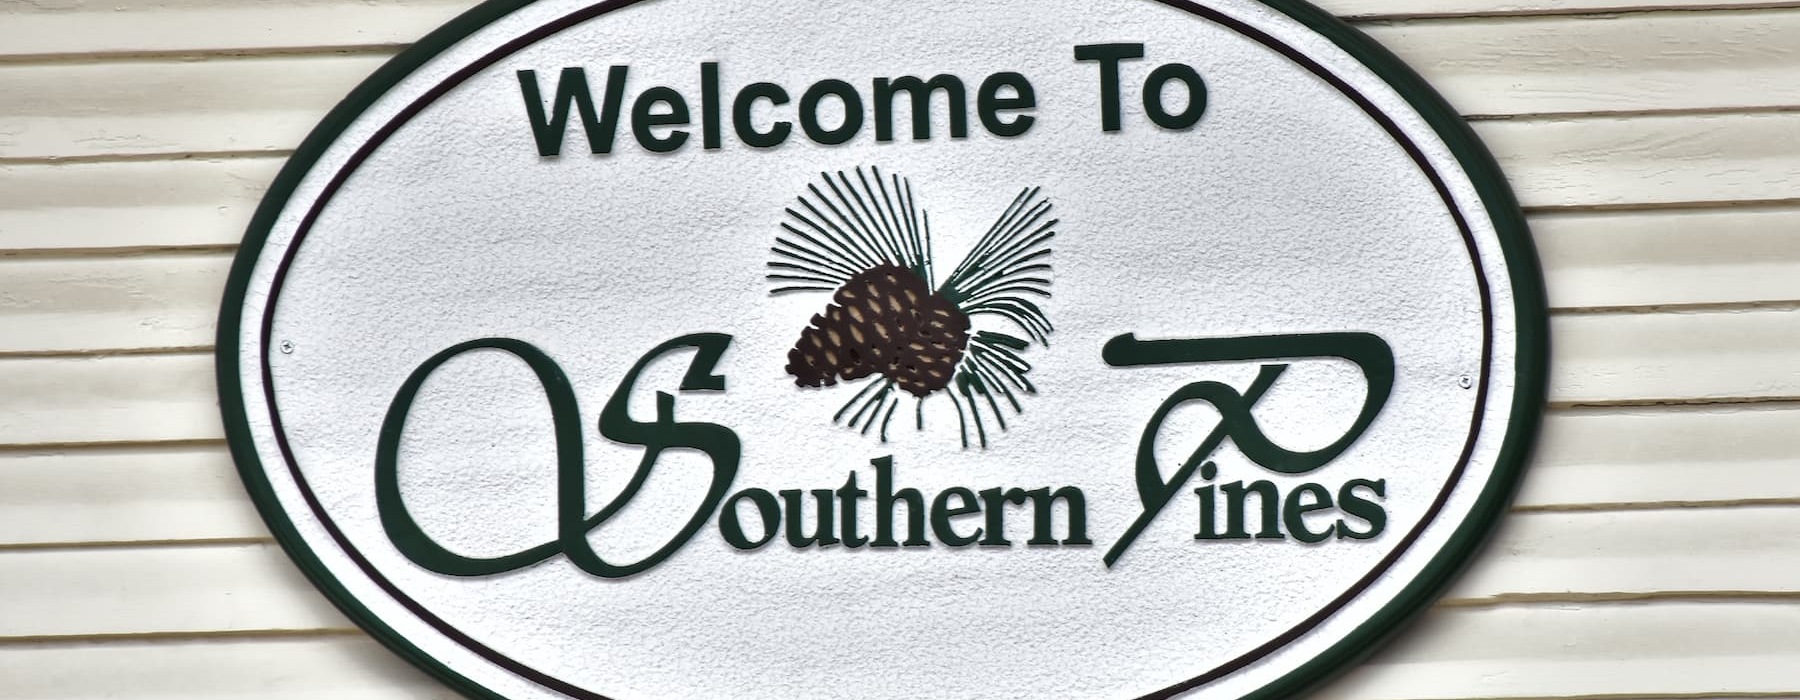 a local sign that ways welcome to southern pines